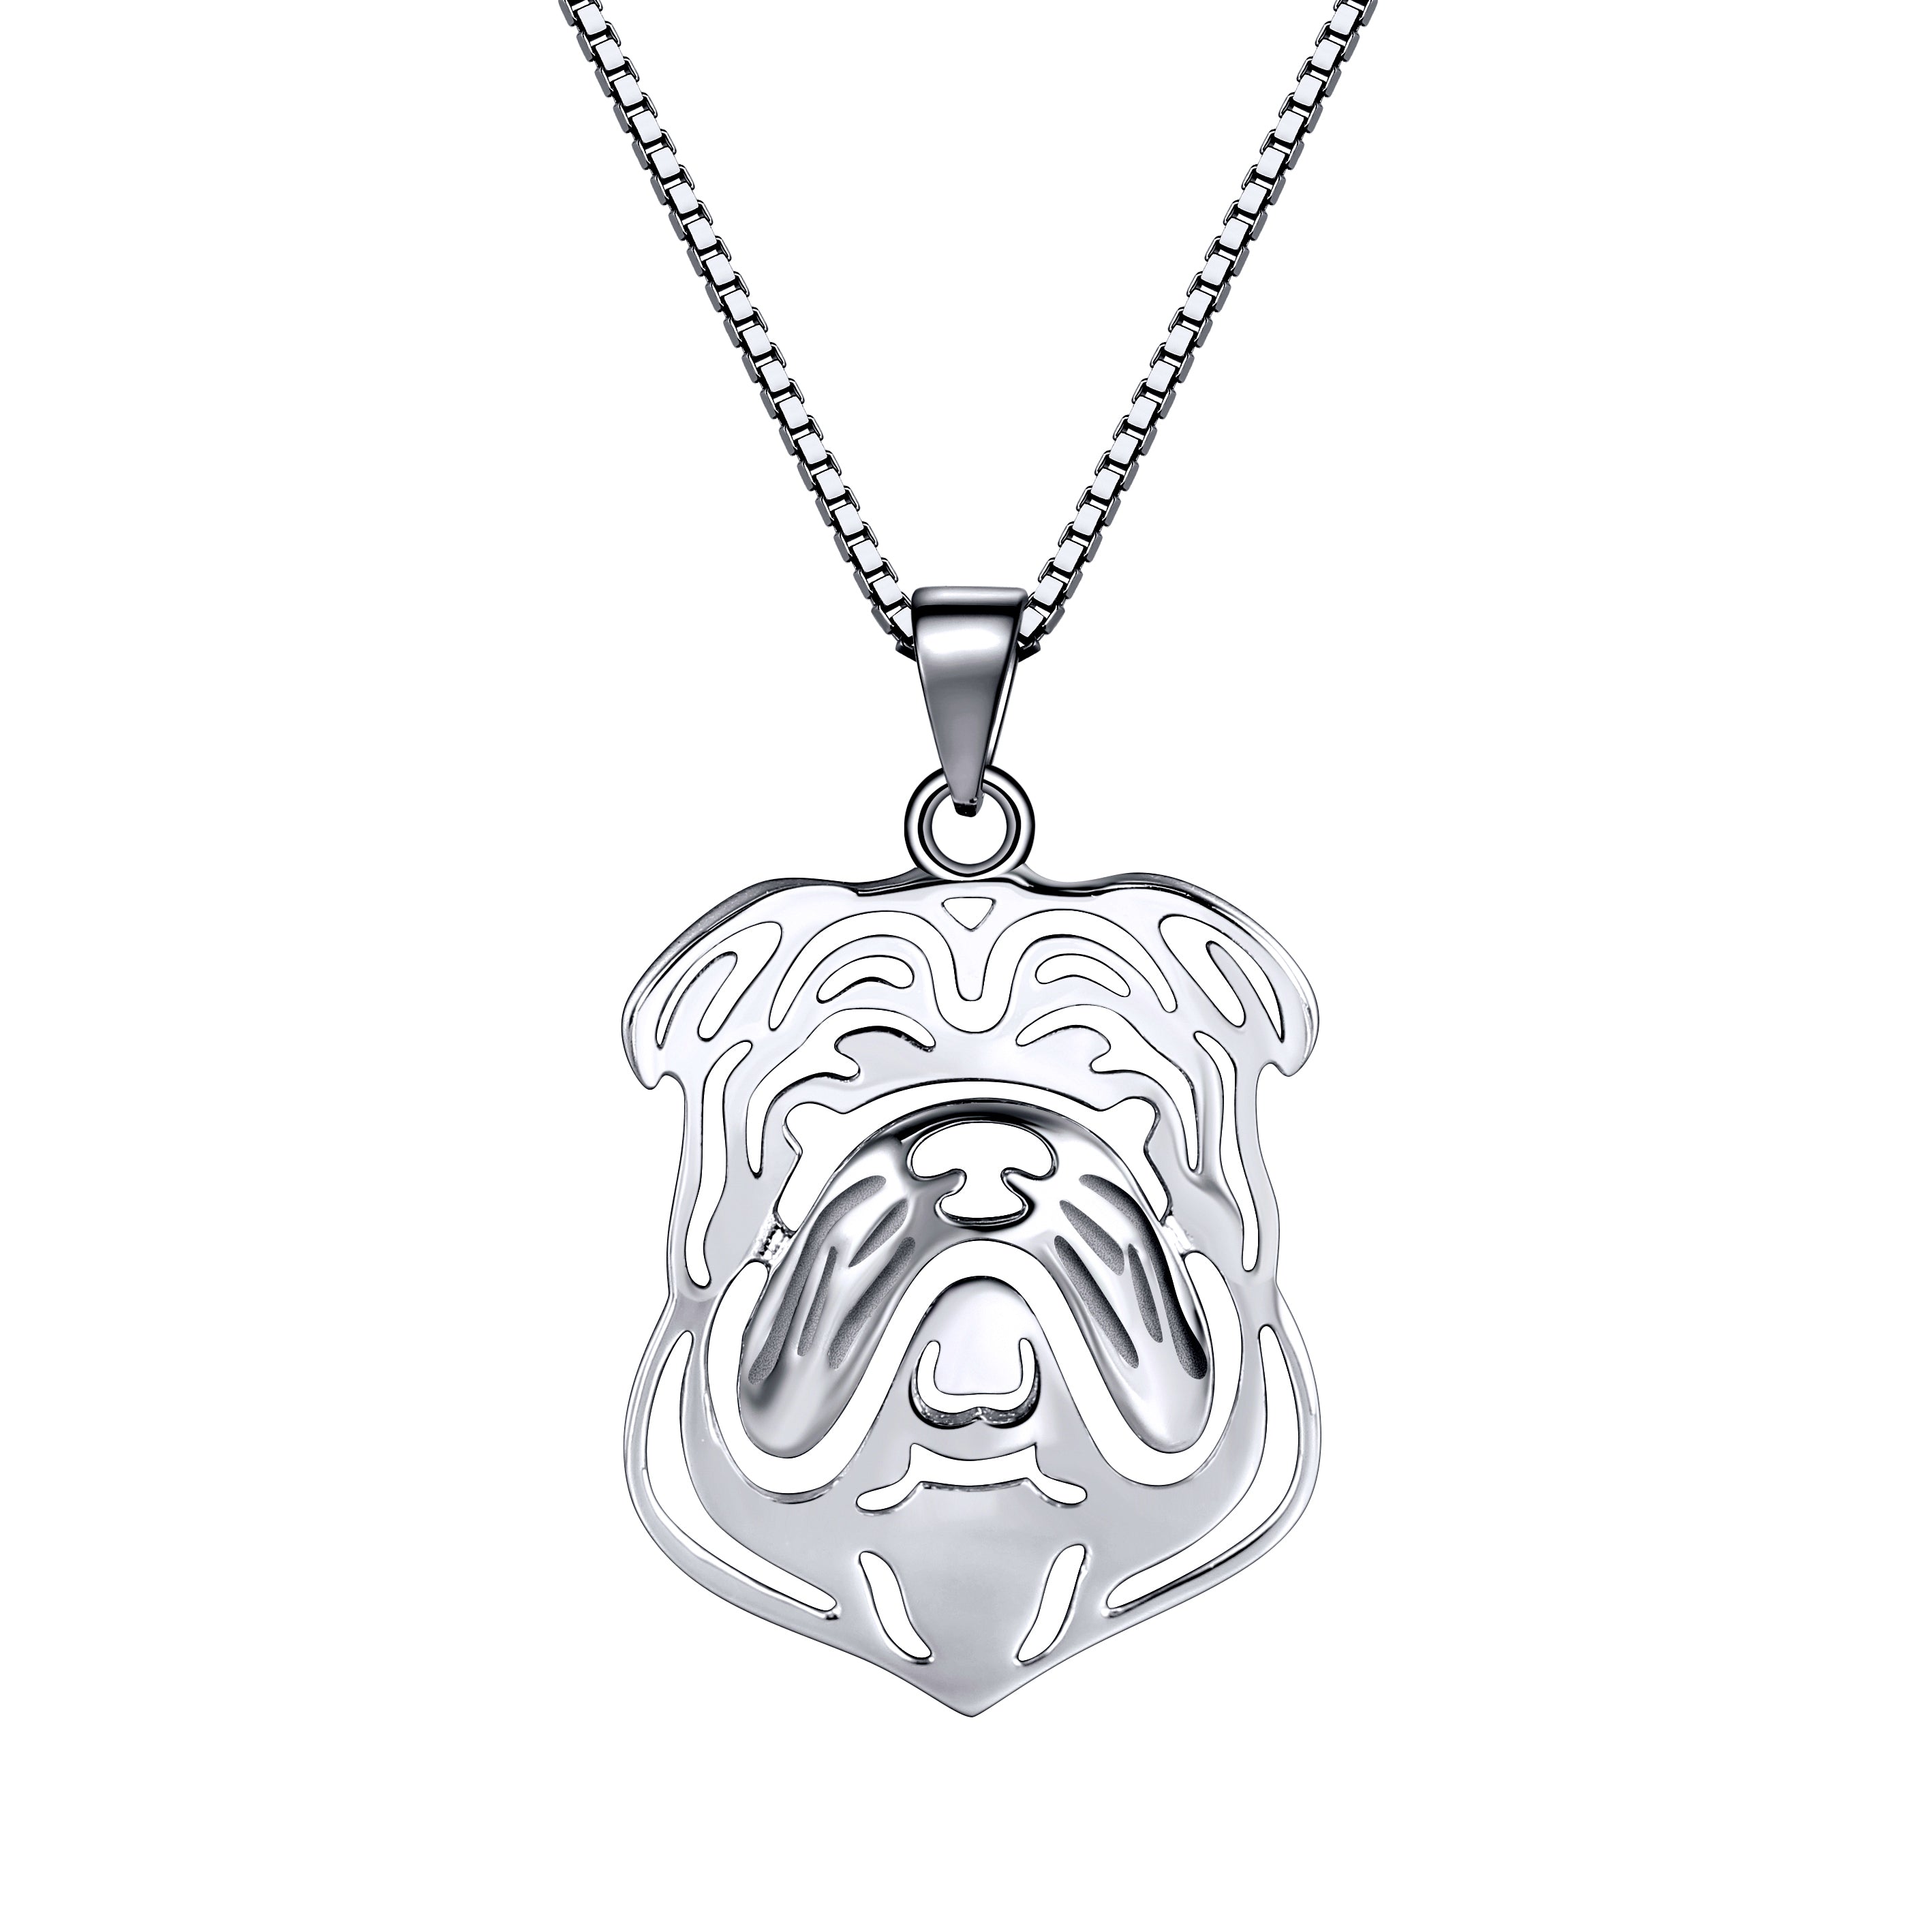 Bulldog Sterling Silver Dog Pendant Necklace Women Ginger Lyne Collection - Necklace